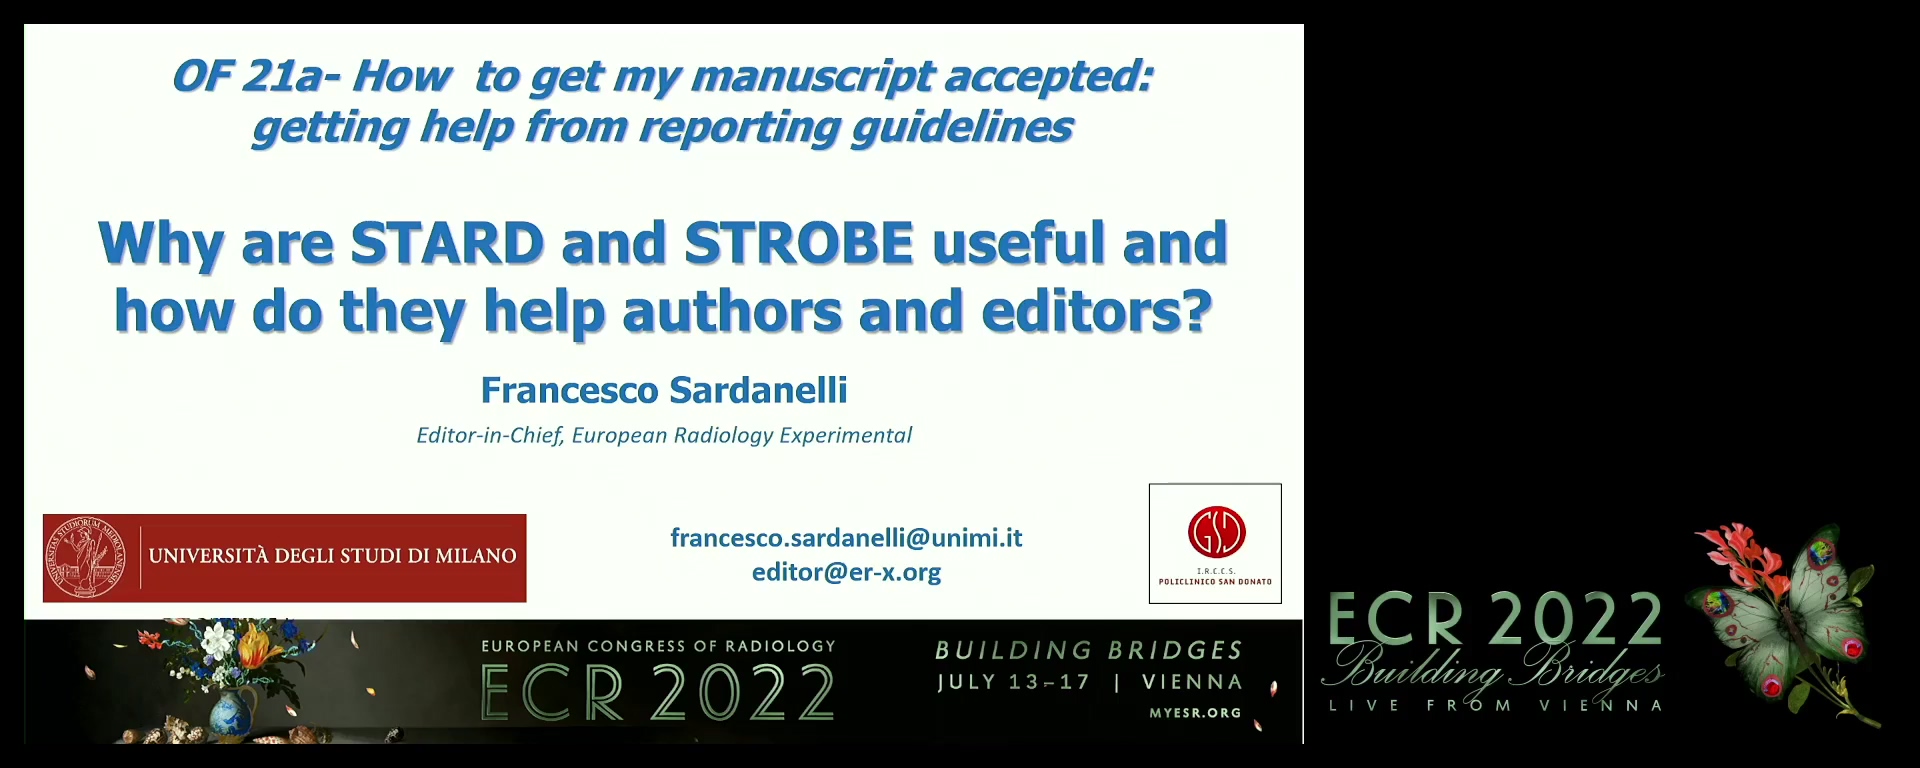 Why are STARD and STROBE useful and how does it help authors and editors? - Francesco Sardanelli, San Donato Milanese / IT